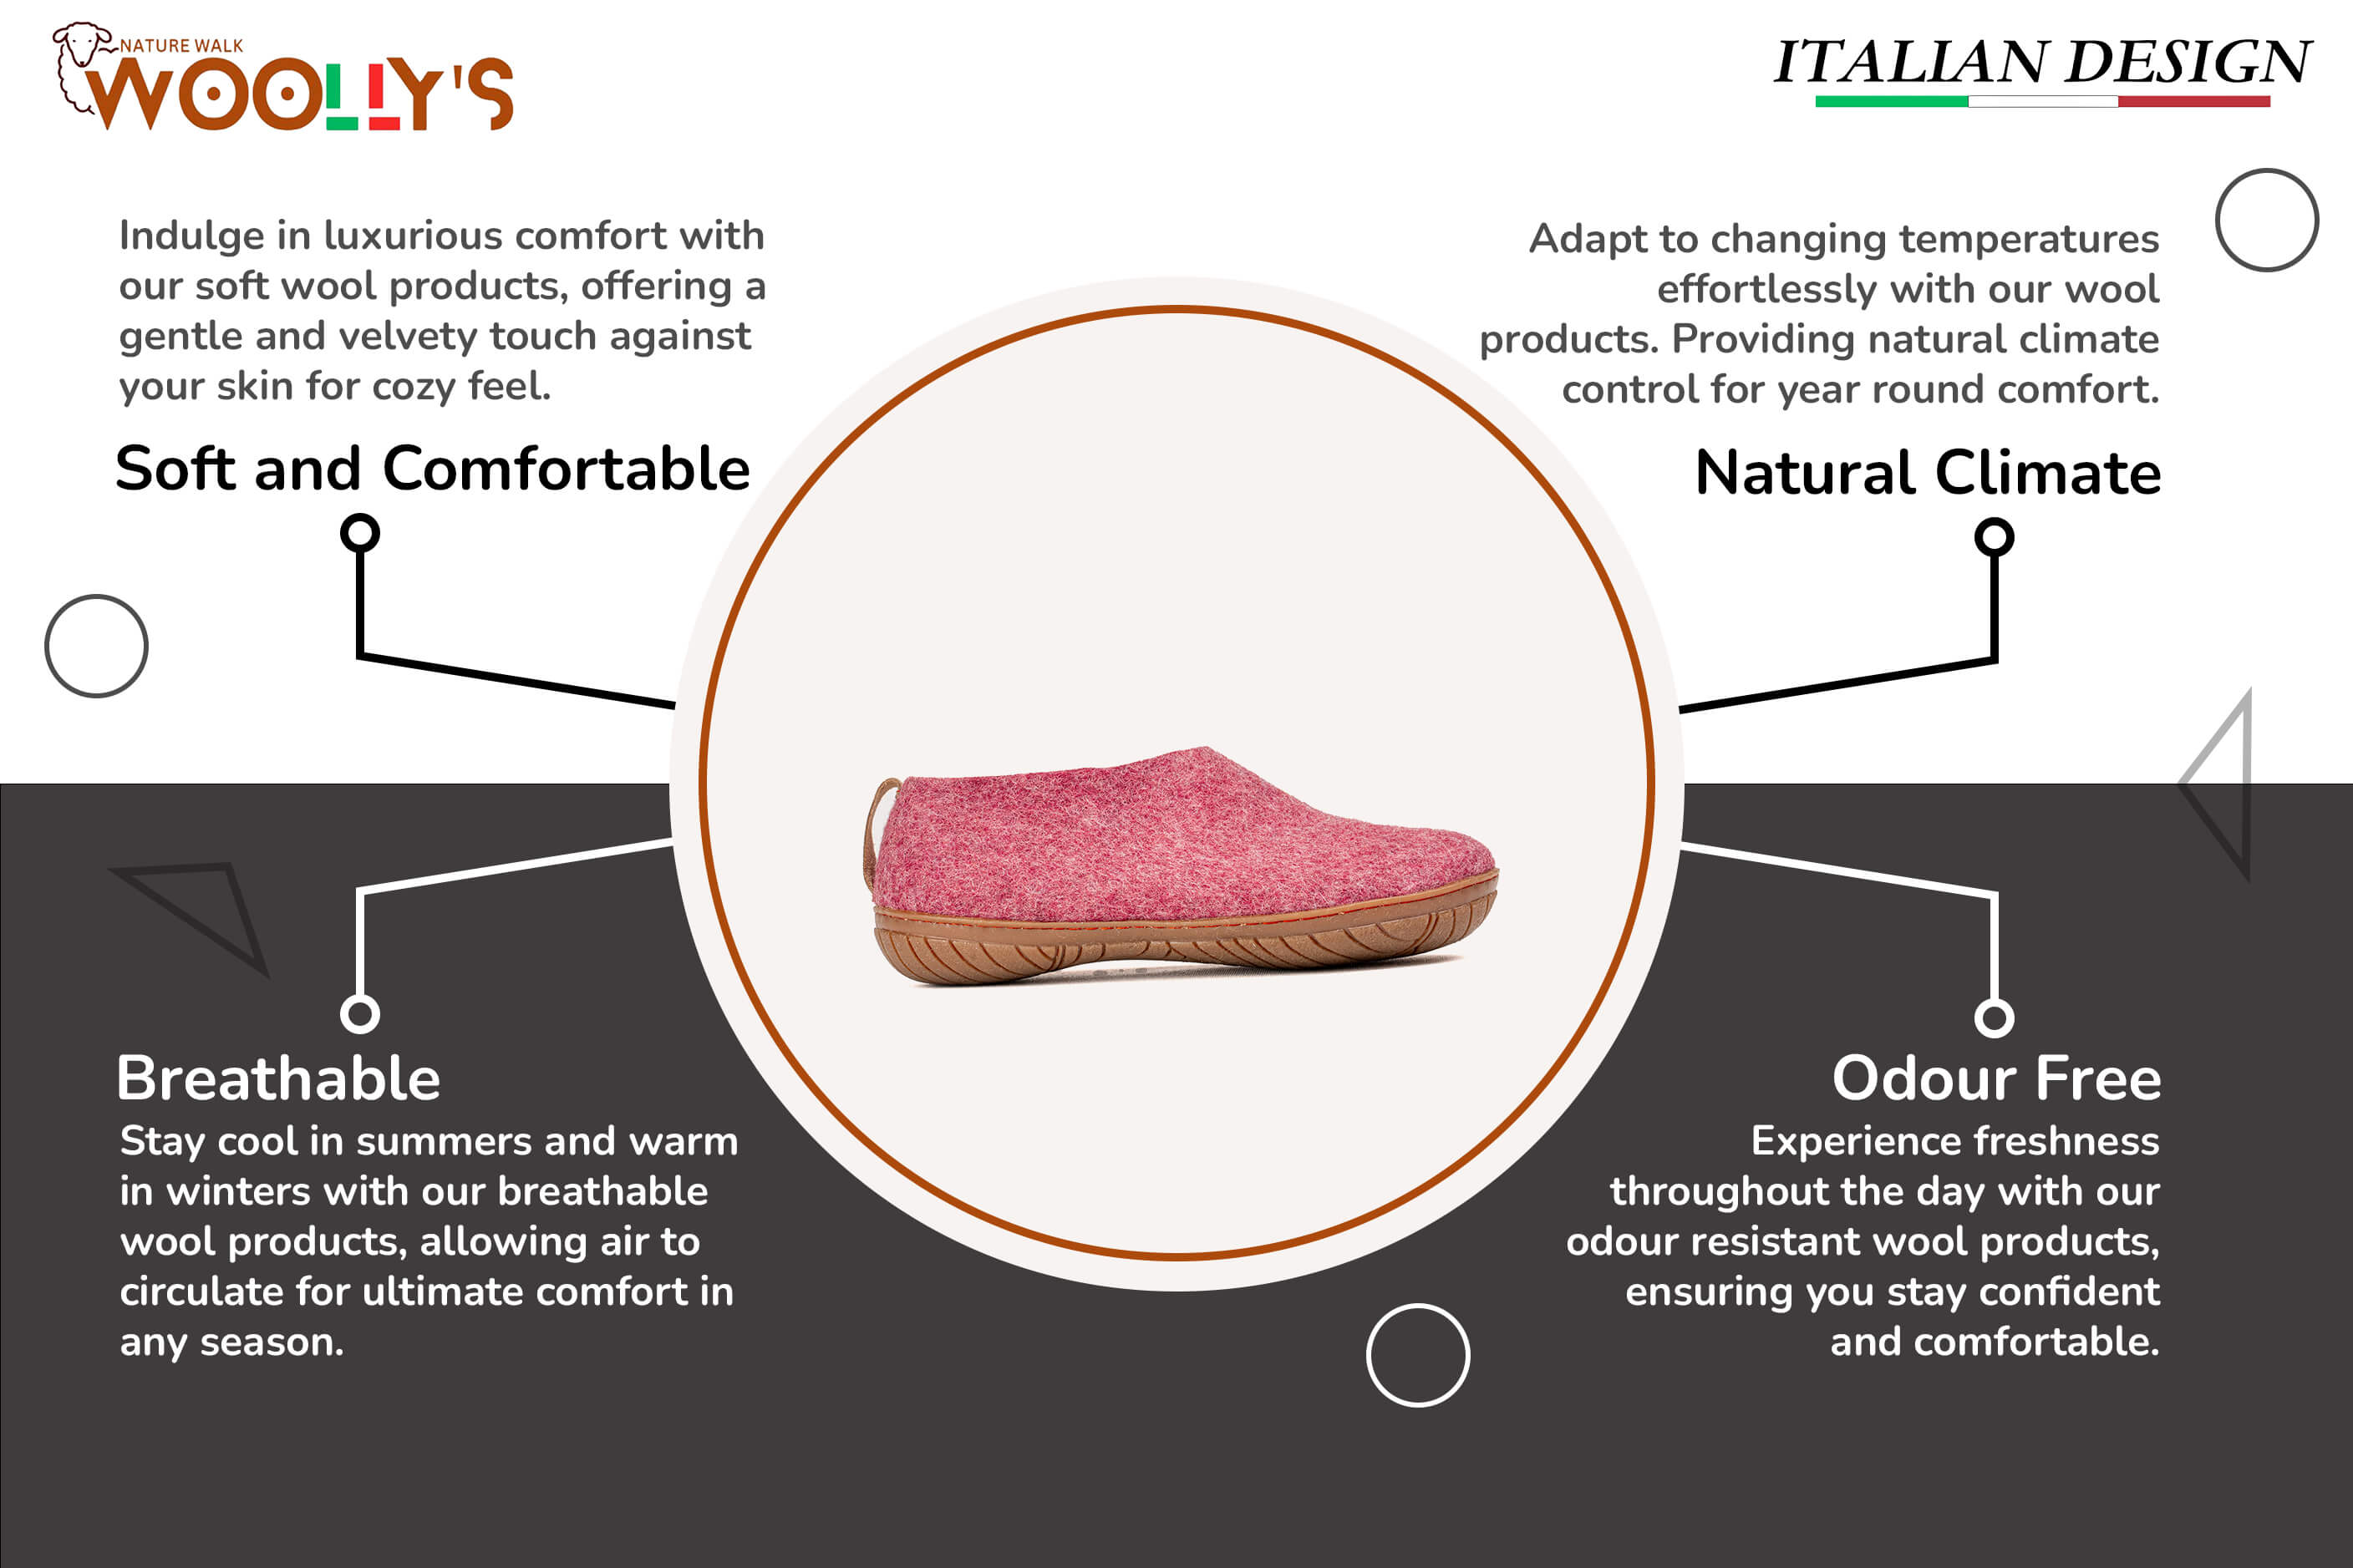 Outdoor Shoes With Rubber Sole - Cherry Pink Feature